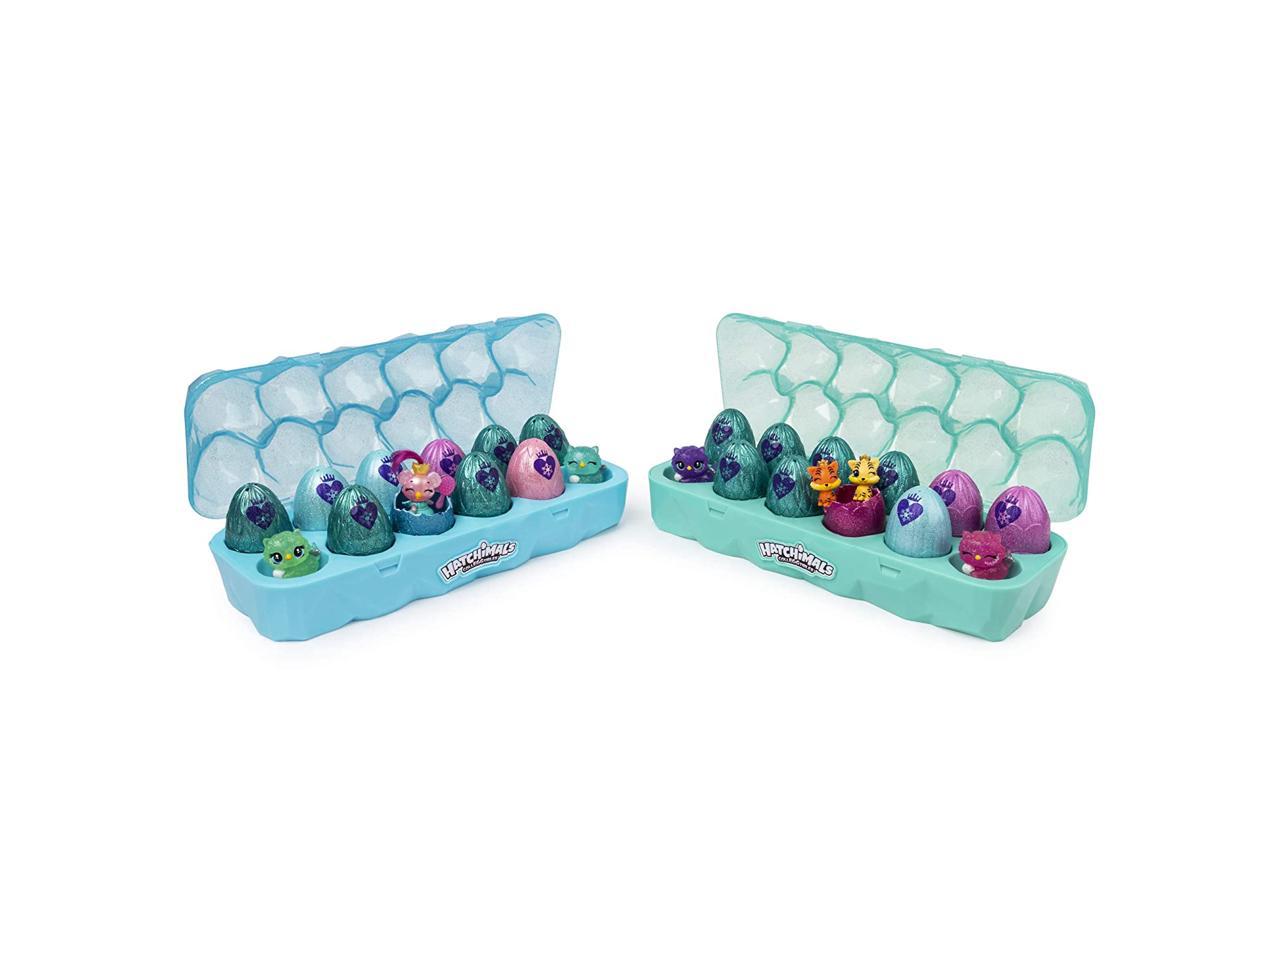 Hatchimals Colleggtibles 6047214 Jewelry Box Royal Dozen 12 Pack Egg Carton with 2 Exclusive for sale online 